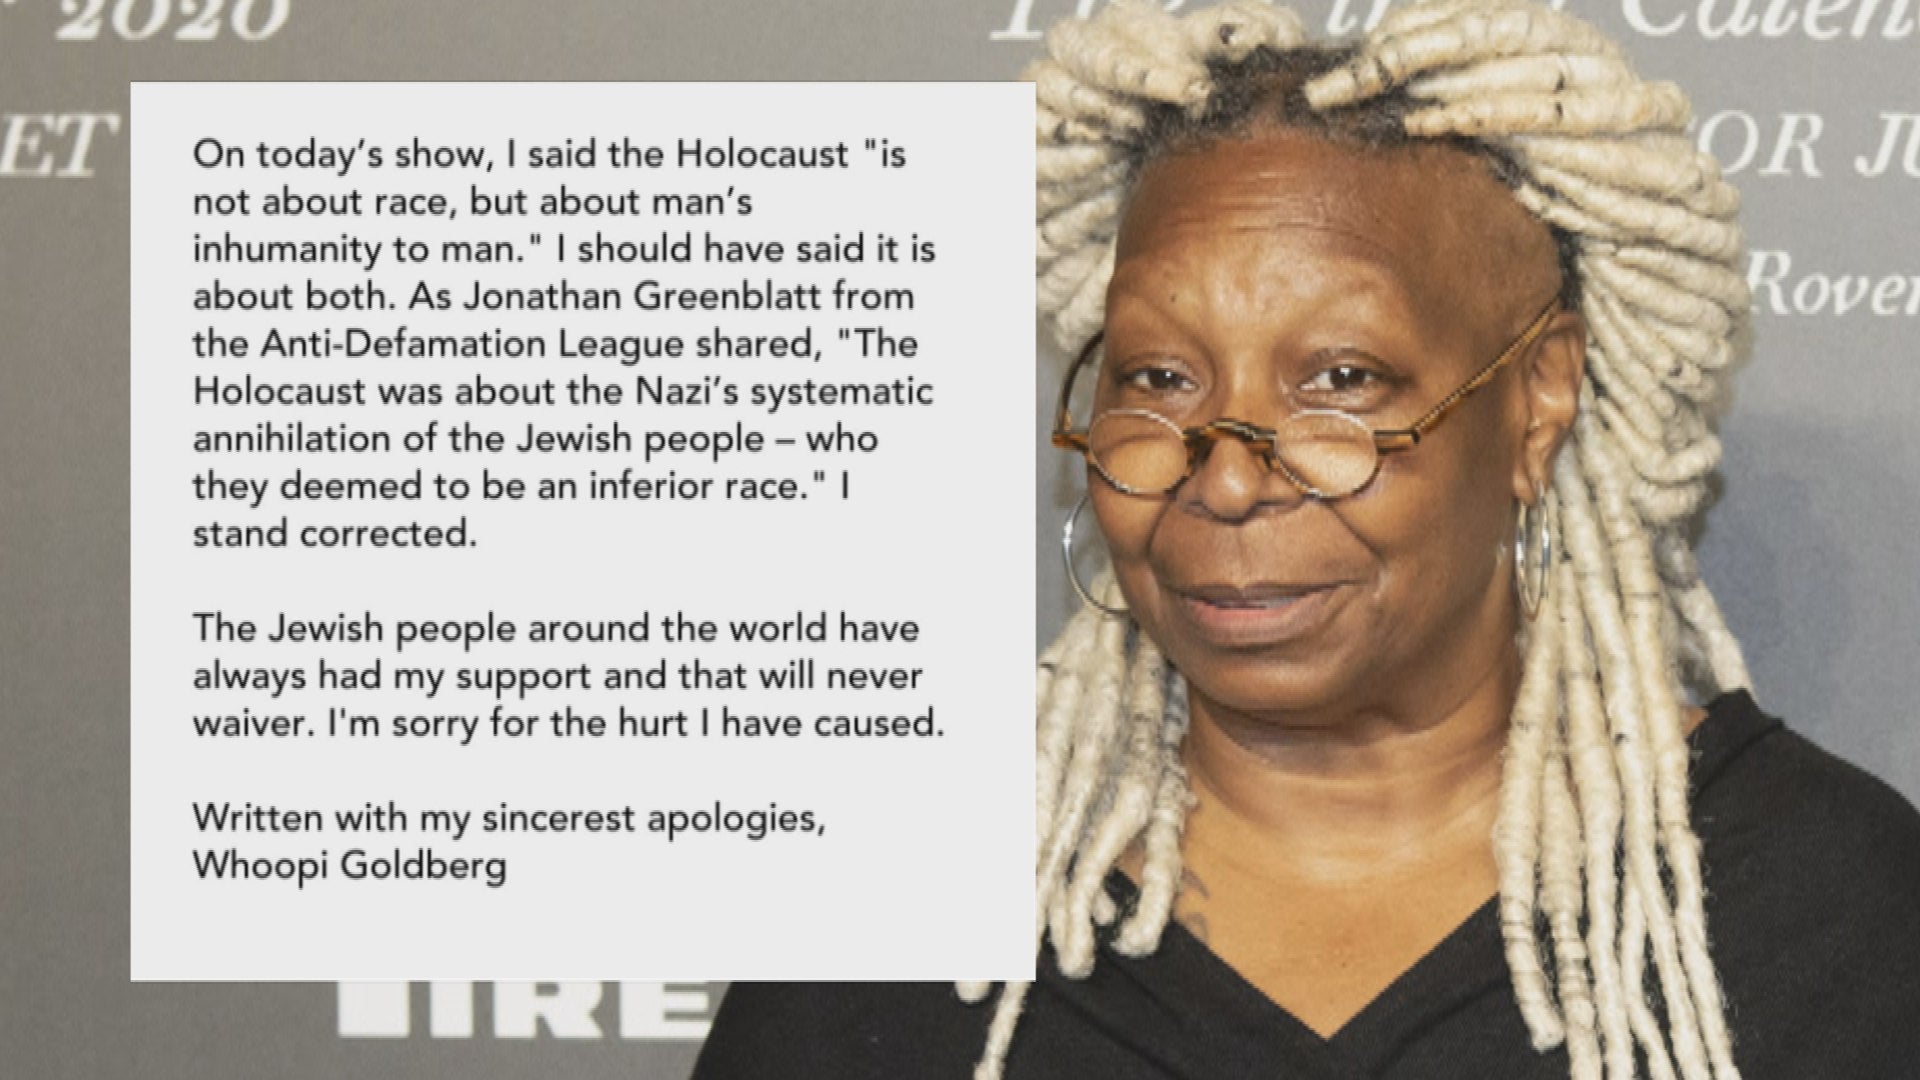 Whoopi is an older woman with small glasses, dark skin, and blonde faux dreads. The image has a quote superimposed: On today's show, I said the Holocaust "is not about race, but about man's inhumanity to man." I should have said it is about both. As Jonathan Greenblatt from the Anti-Defamation League shared, "The Holocaust was about the Nazi's systematic annihilation of the Jewish people - who they deemed to be an inferior race." I stand corrected. The Jewish people around the world have always had my support and that will never waiver. I'm sorry for the hurt I have caused. Written with my sincerest apologies, Whoopi Goldberg.